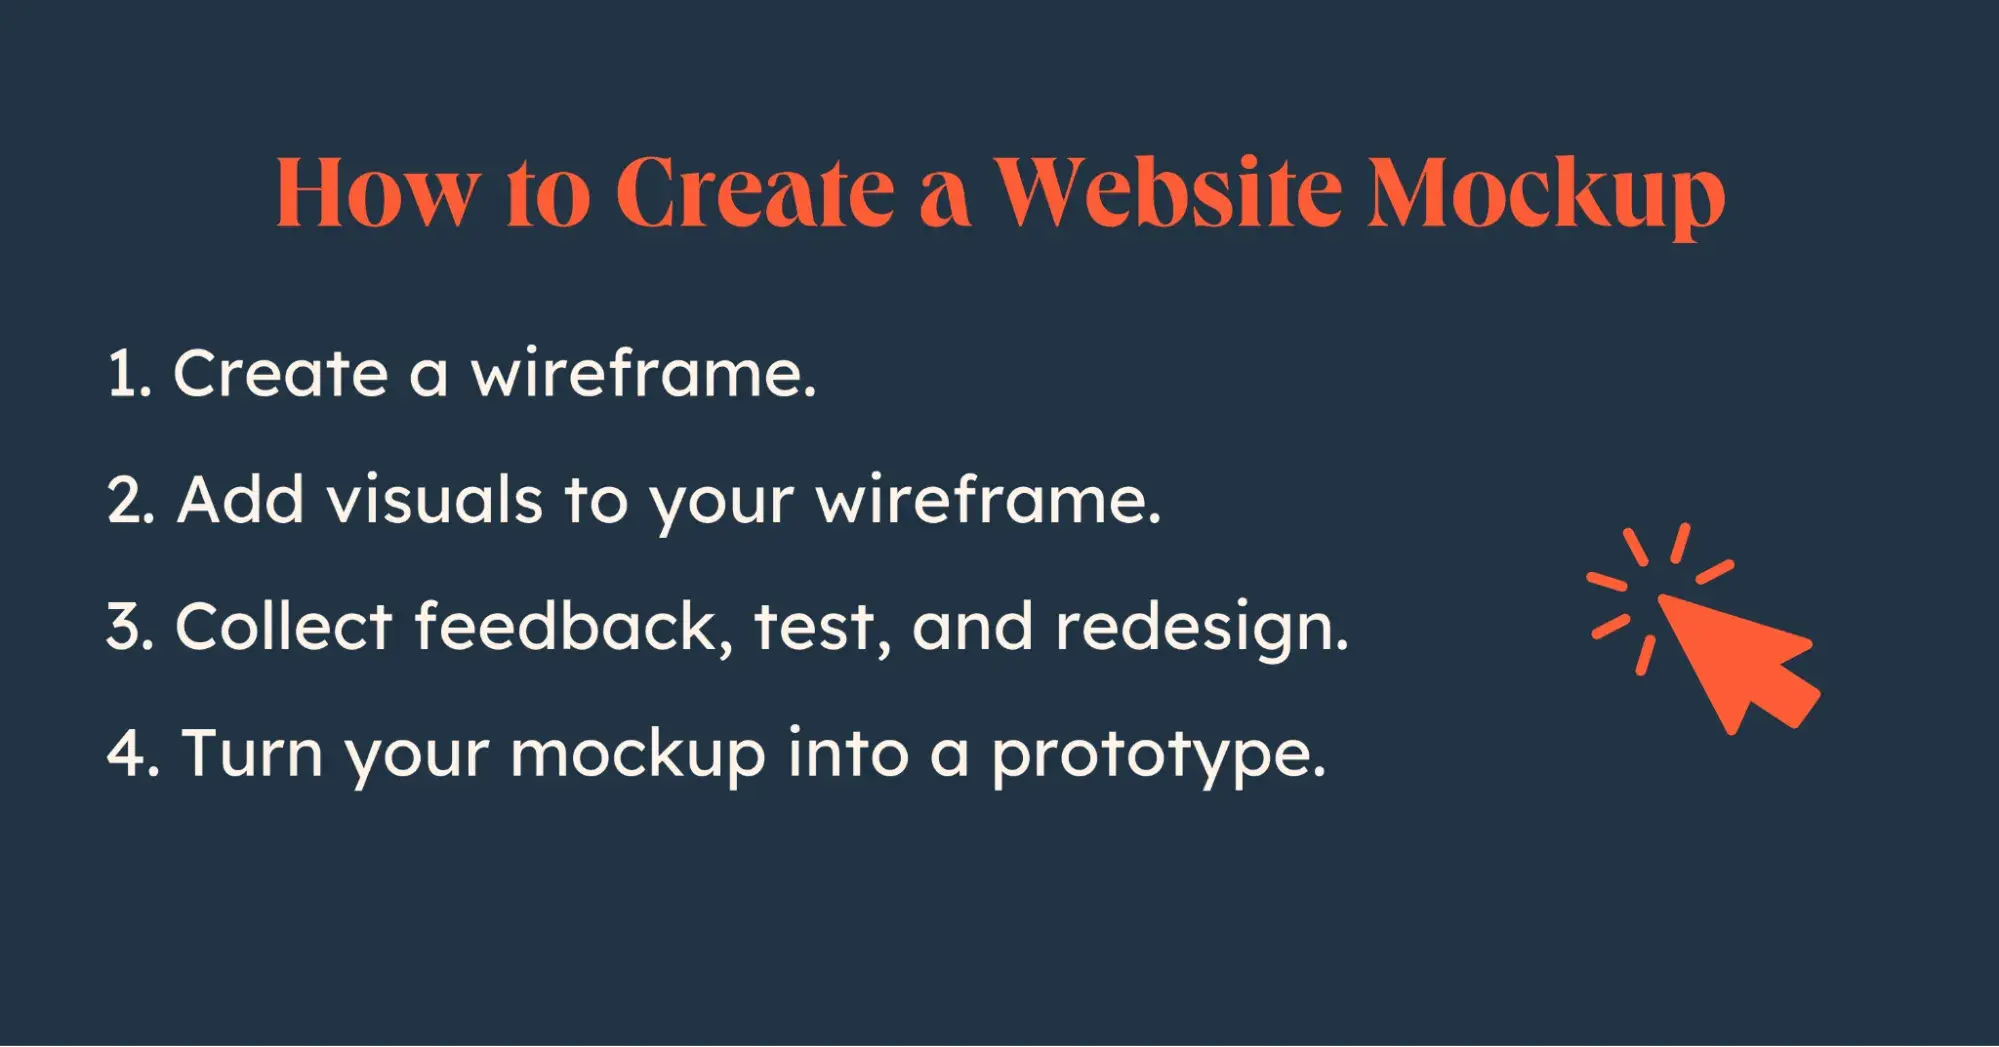 steps of how to create a website mockup